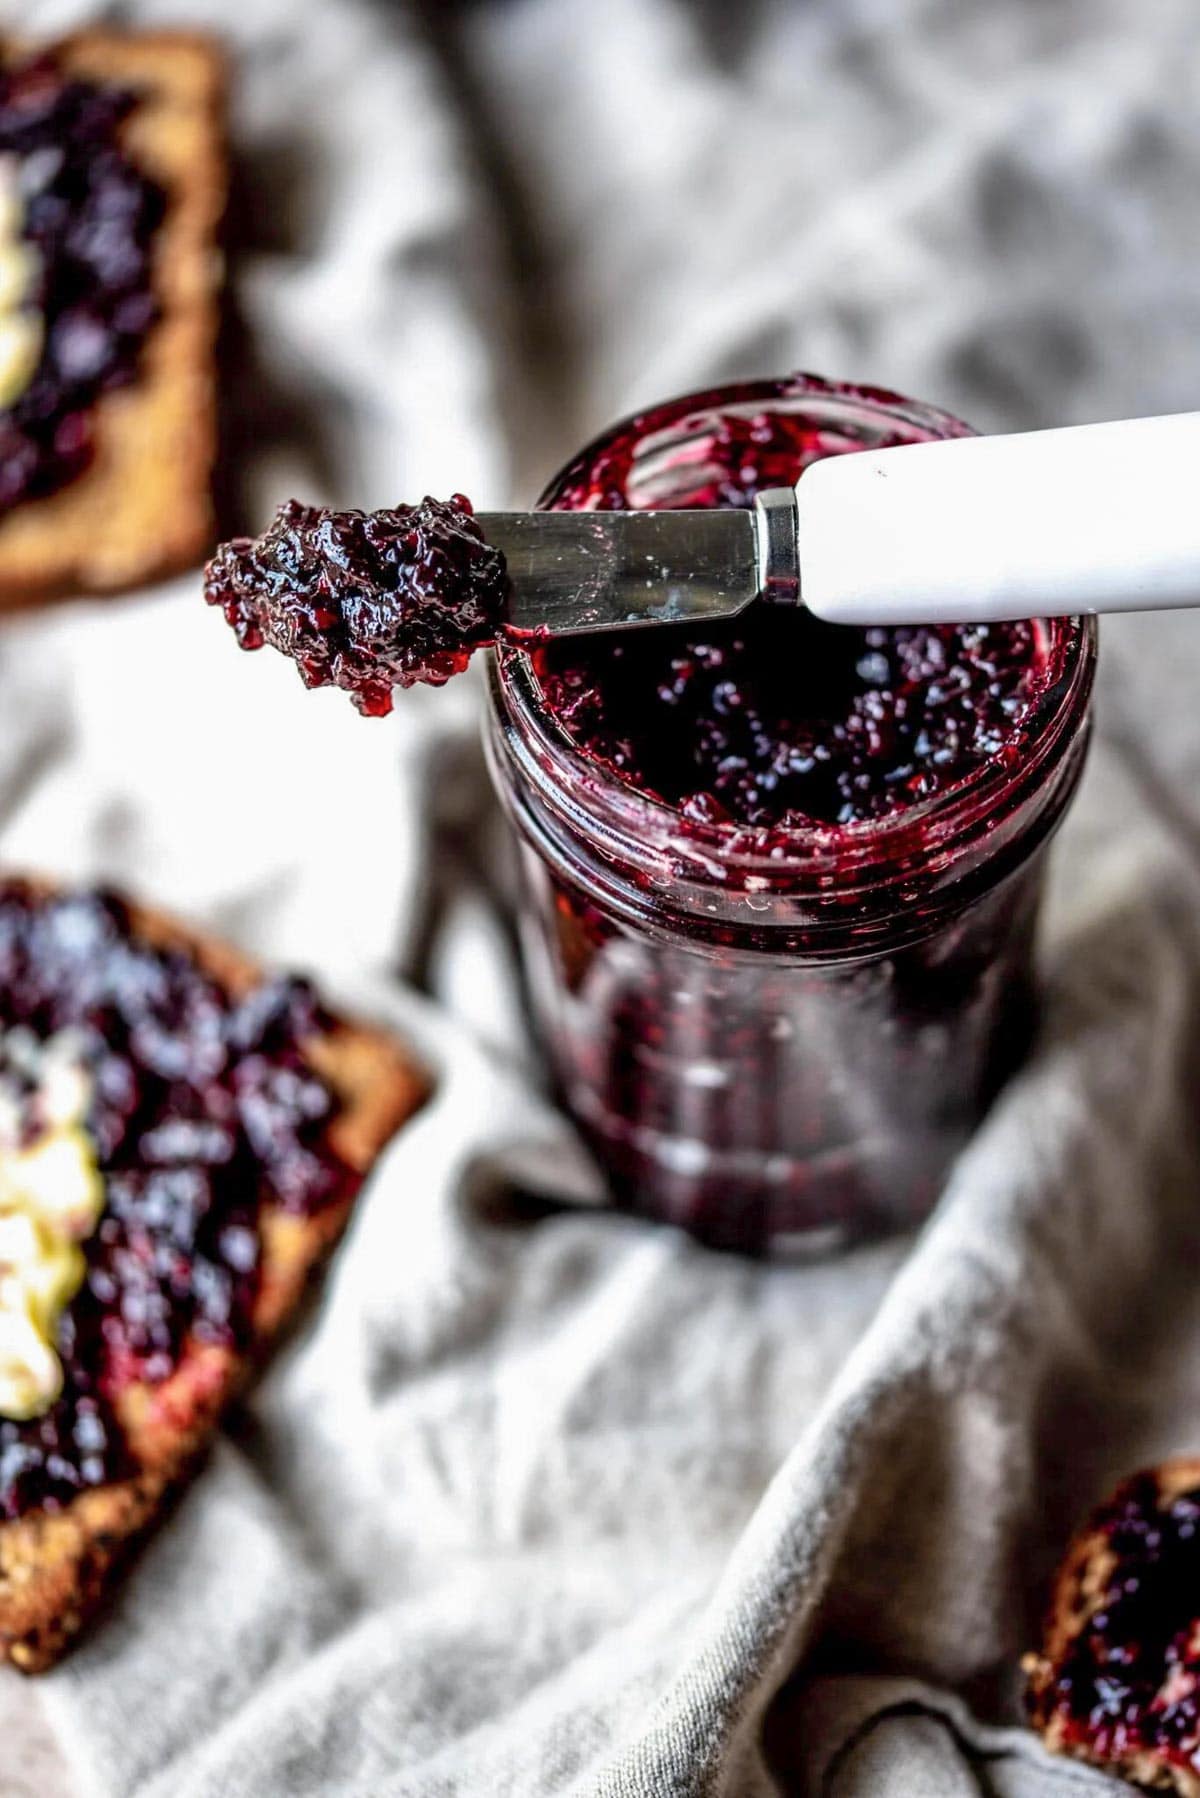 Blackberry jam in small glass jar with a small knife balancing on top of the jar.